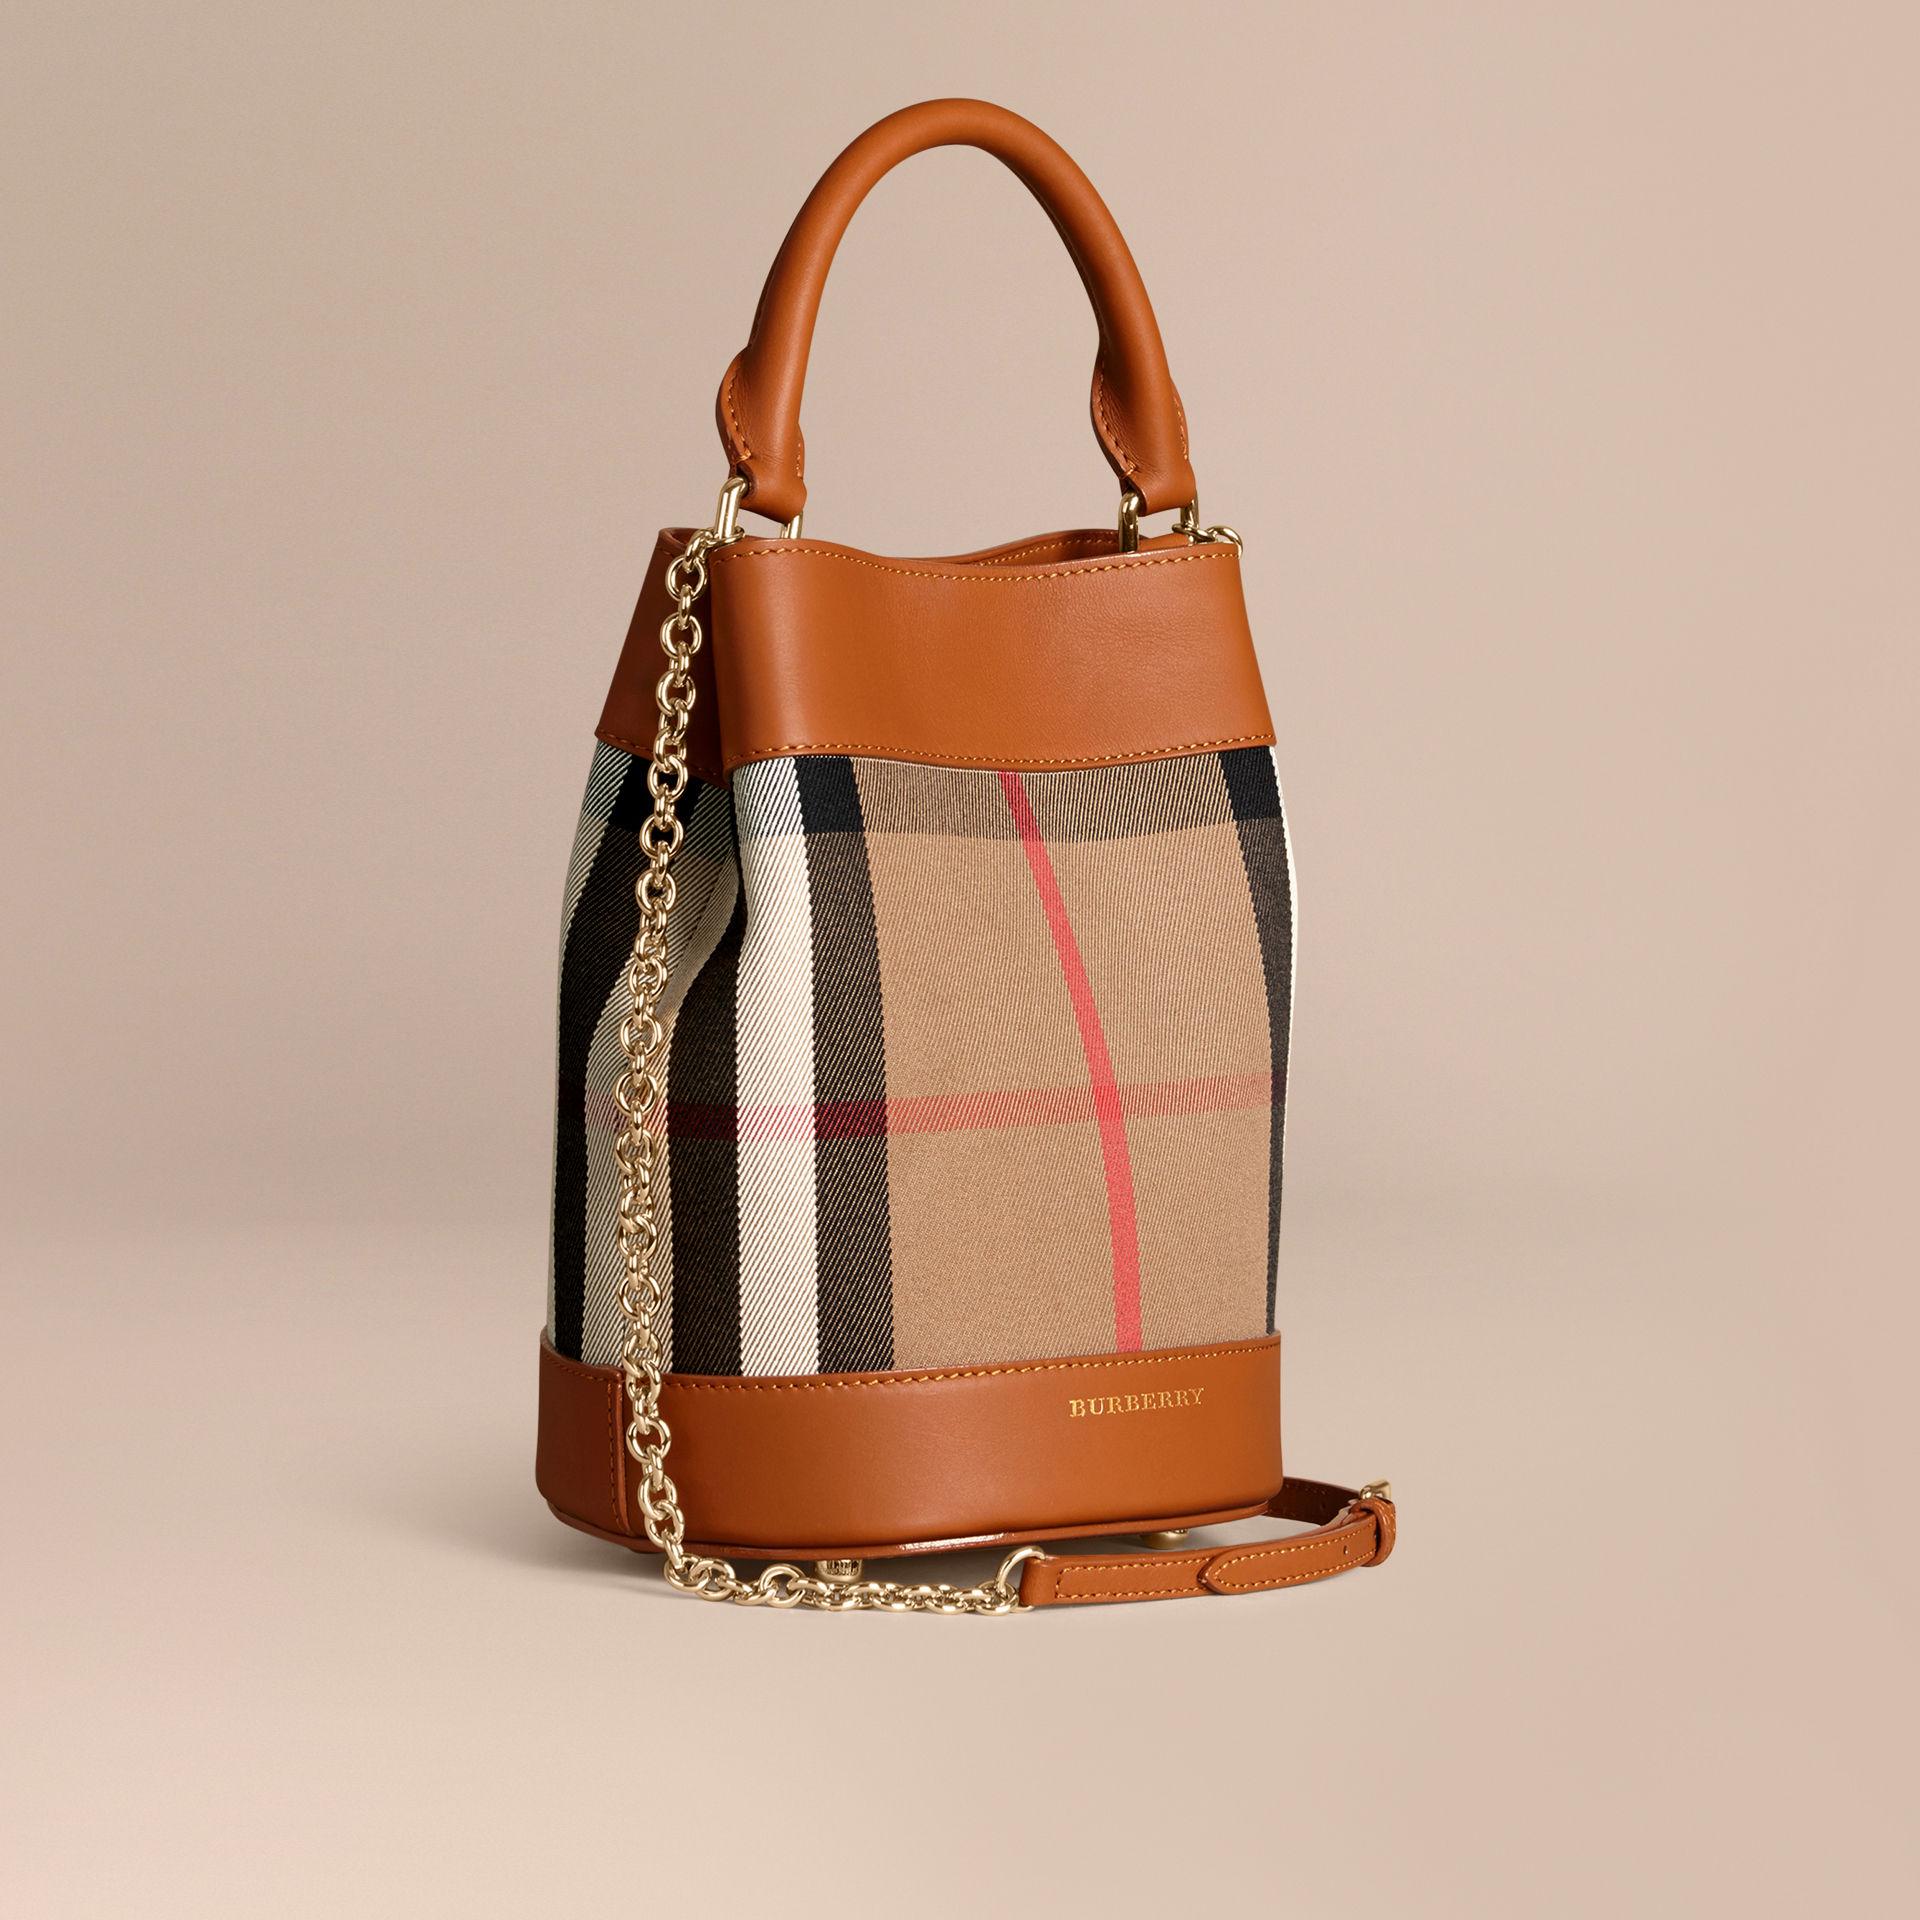 bag burberry sale OFF 52% - Online Shopping Site for Fashion & Lifestyle.